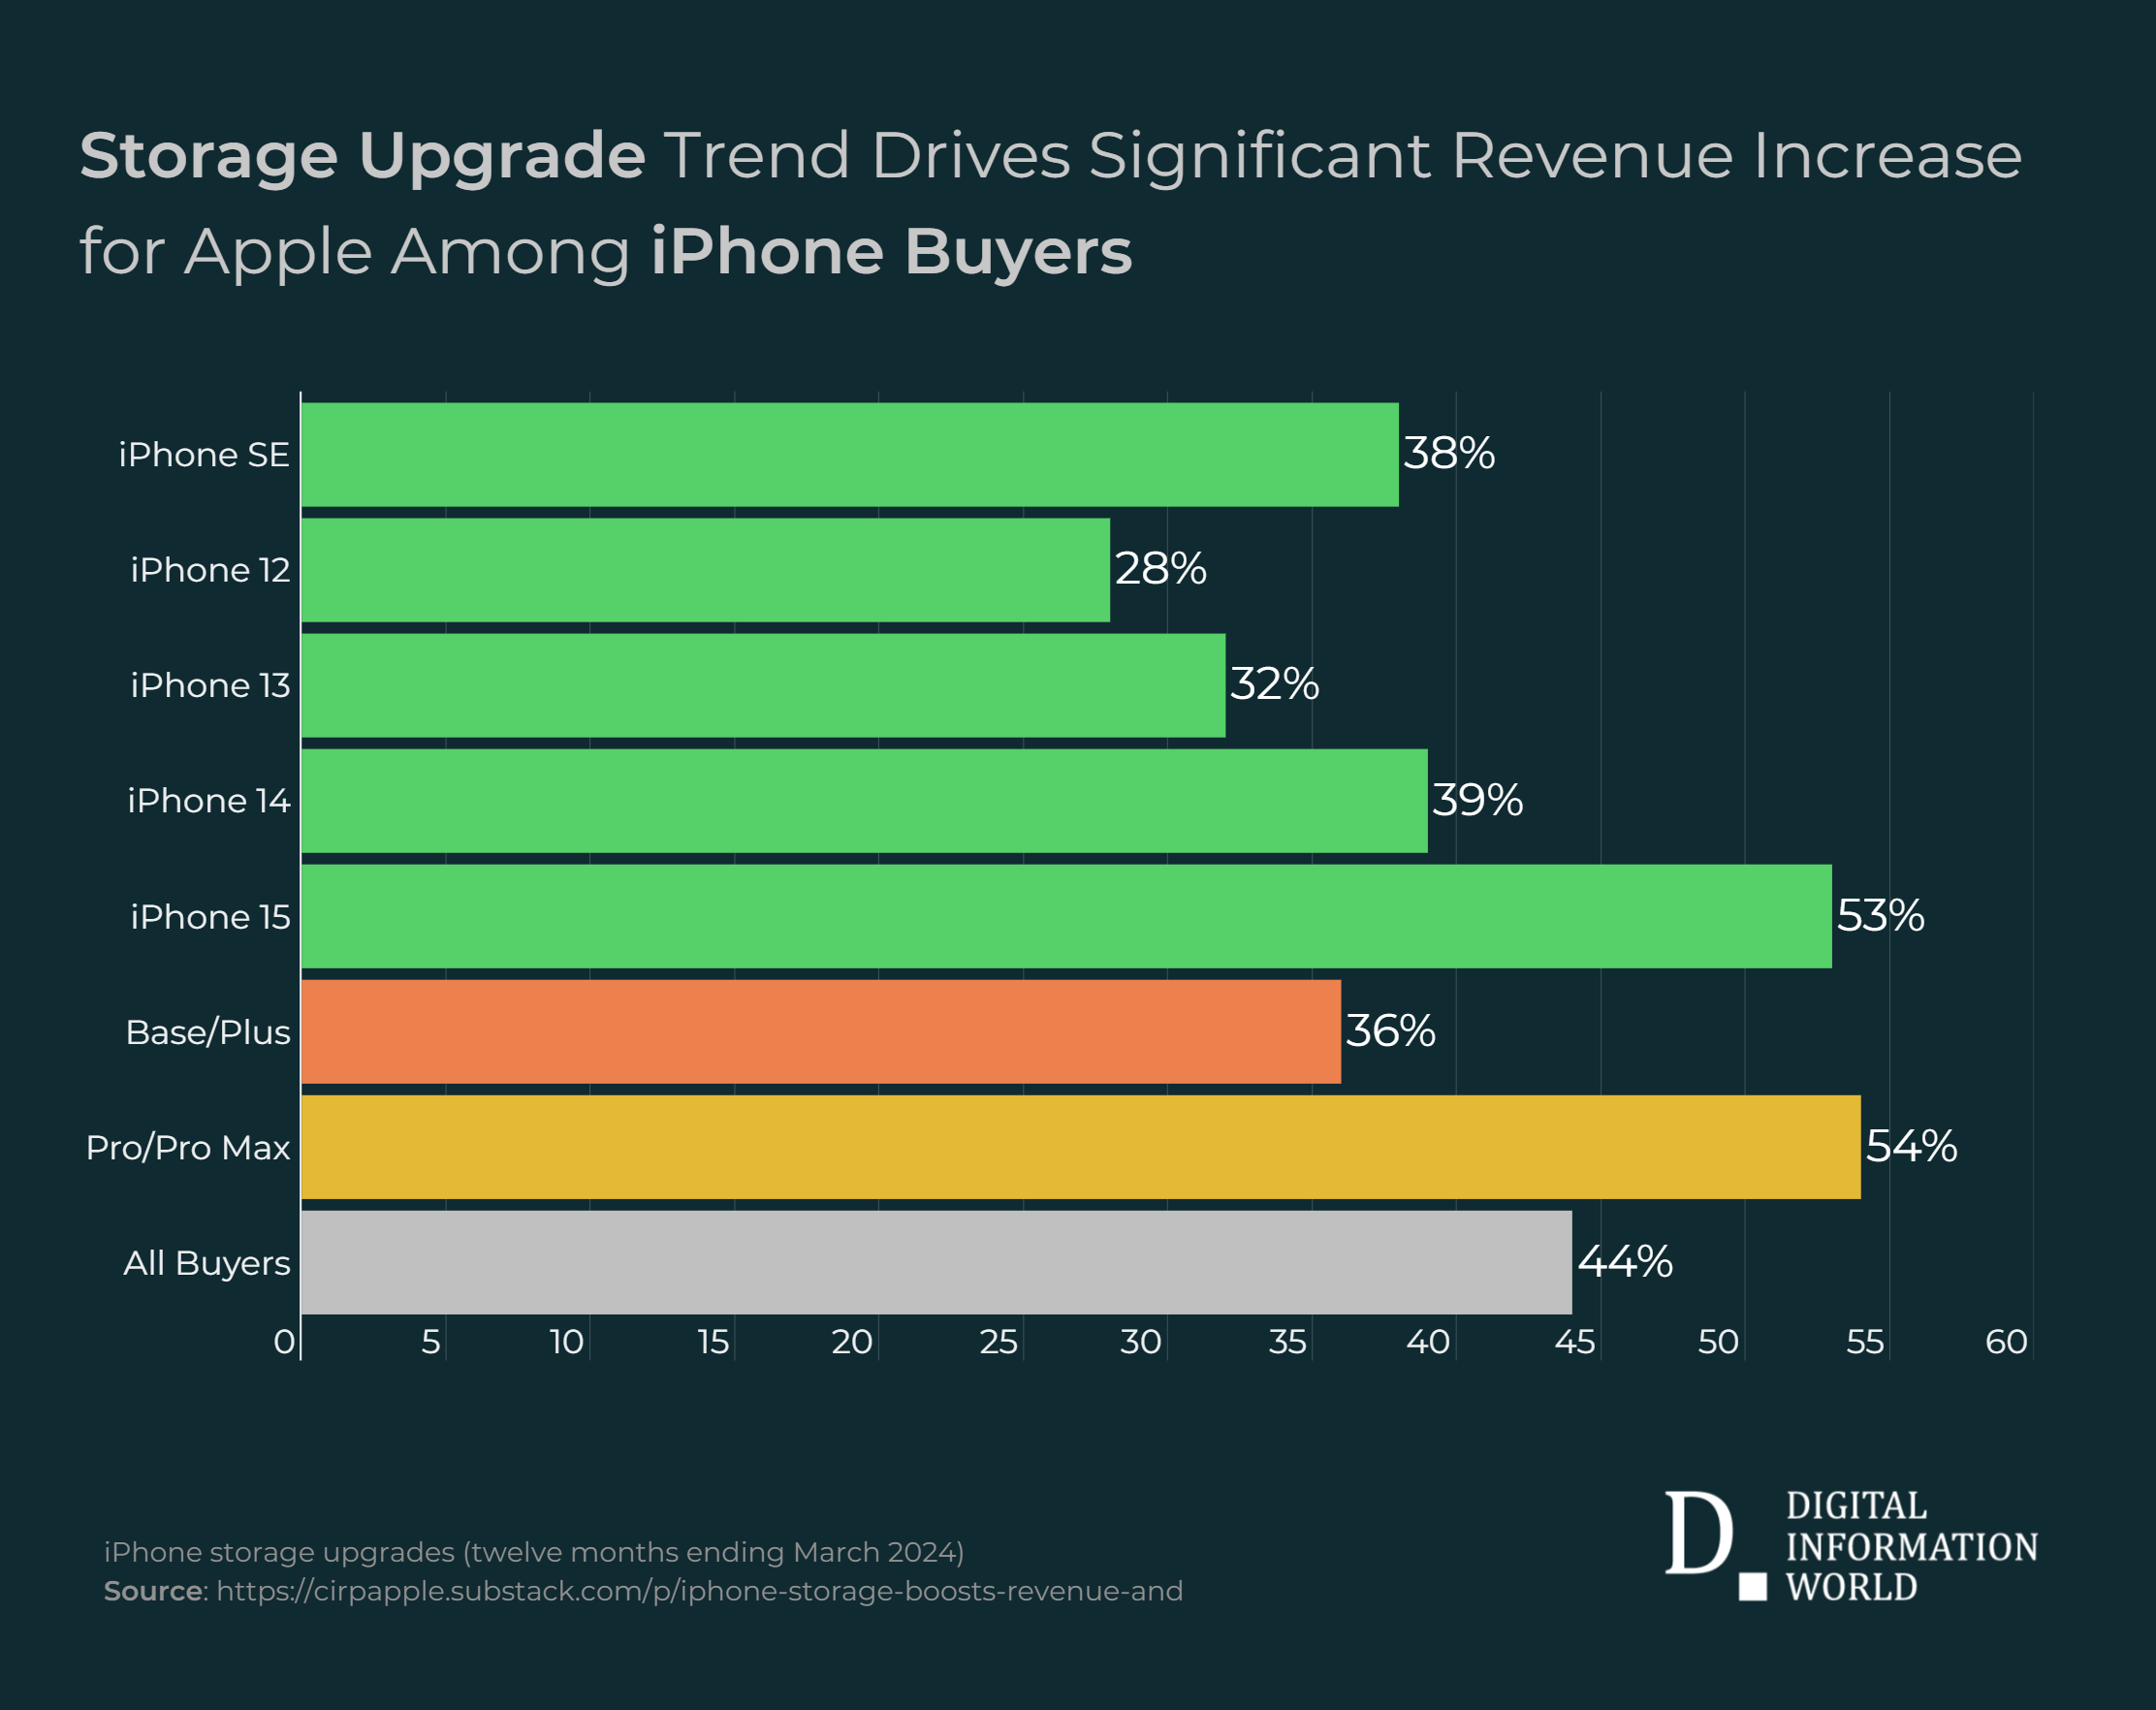 CIRP report highlights iPhone storage upgrades as a profit driver for Apple, with 44% opting for upgrades, rising to 50% for iPhone 15.